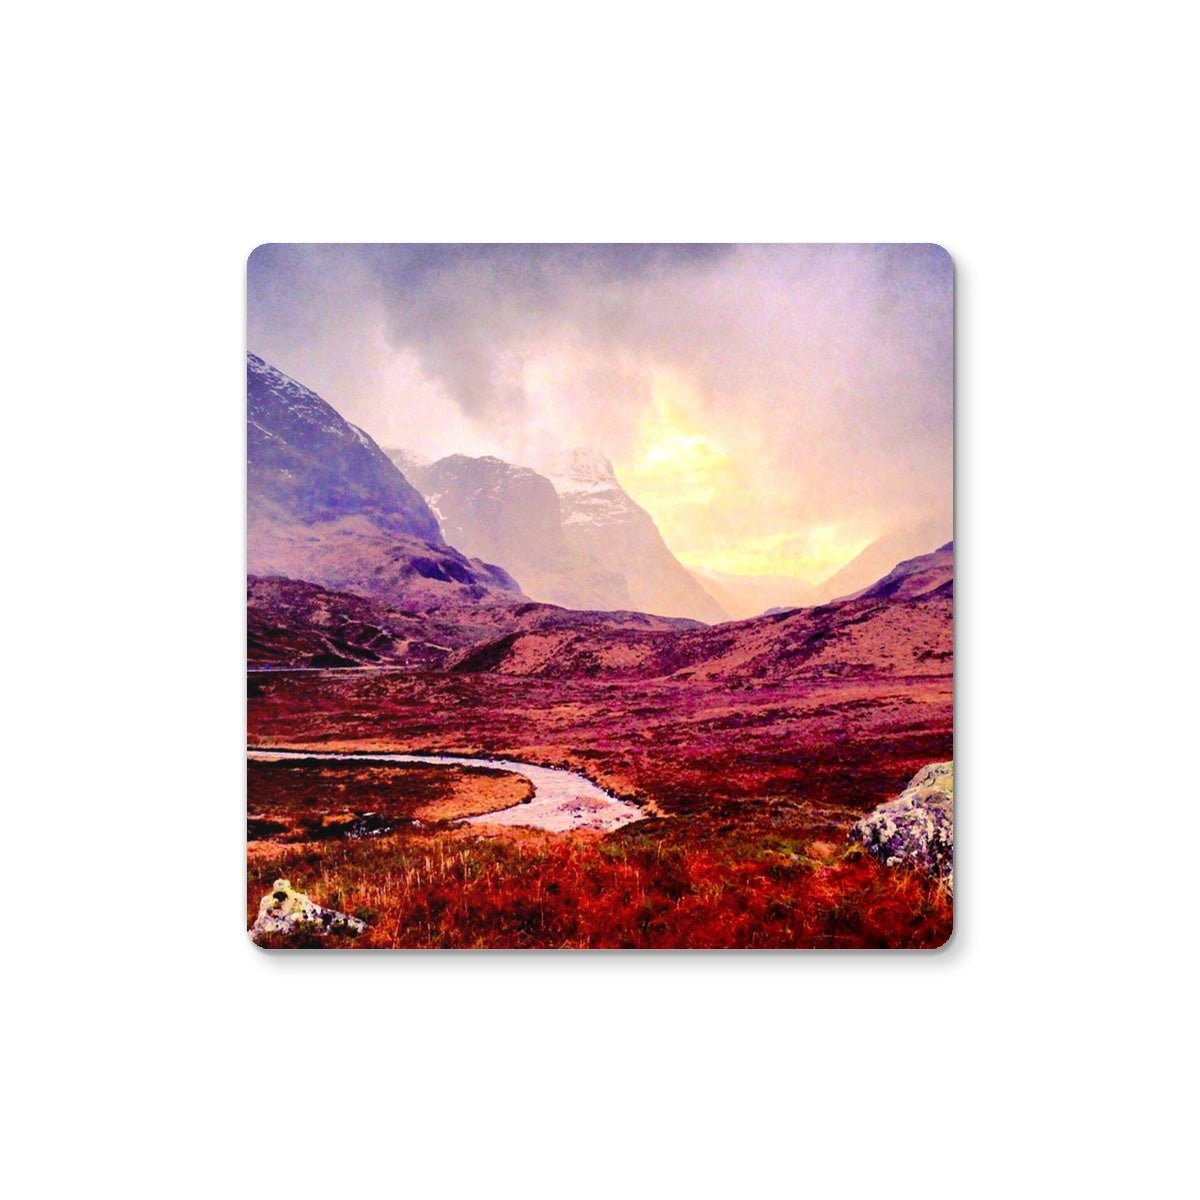 A Brooding Glencoe Art Gifts Coaster-Coasters-Glencoe Art Gallery-4 Coasters-Paintings, Prints, Homeware, Art Gifts From Scotland By Scottish Artist Kevin Hunter